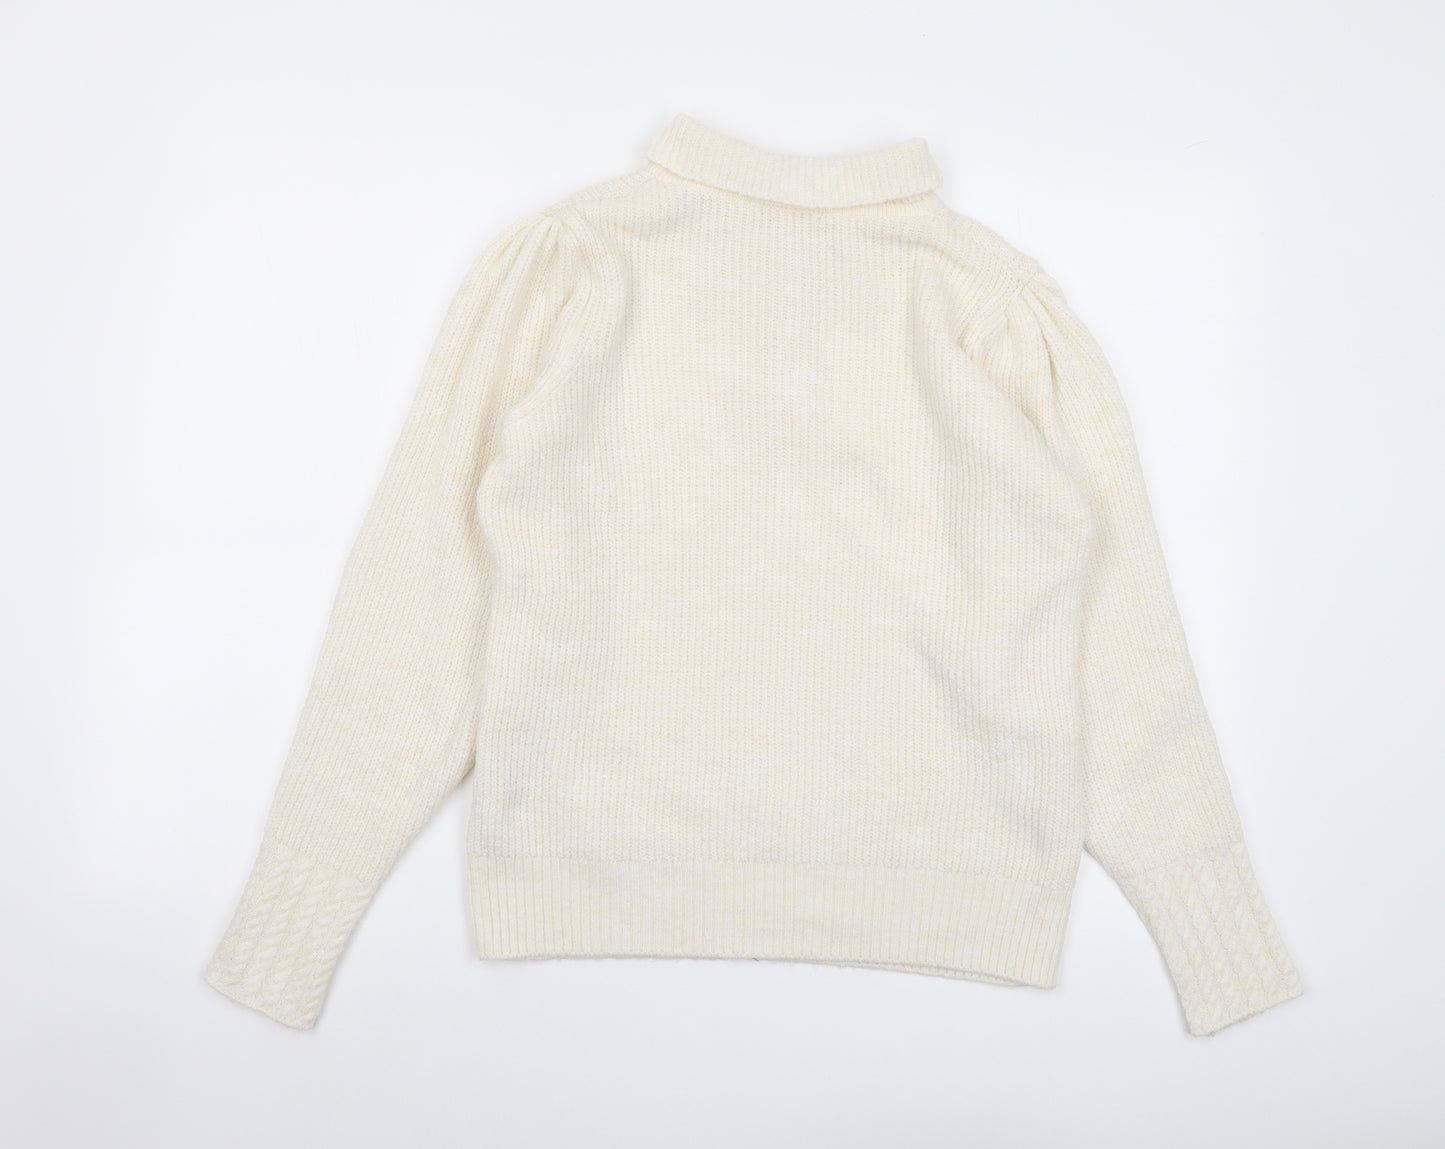 NEXT Womens Ivory Collared Acrylic Pullover Jumper Size S